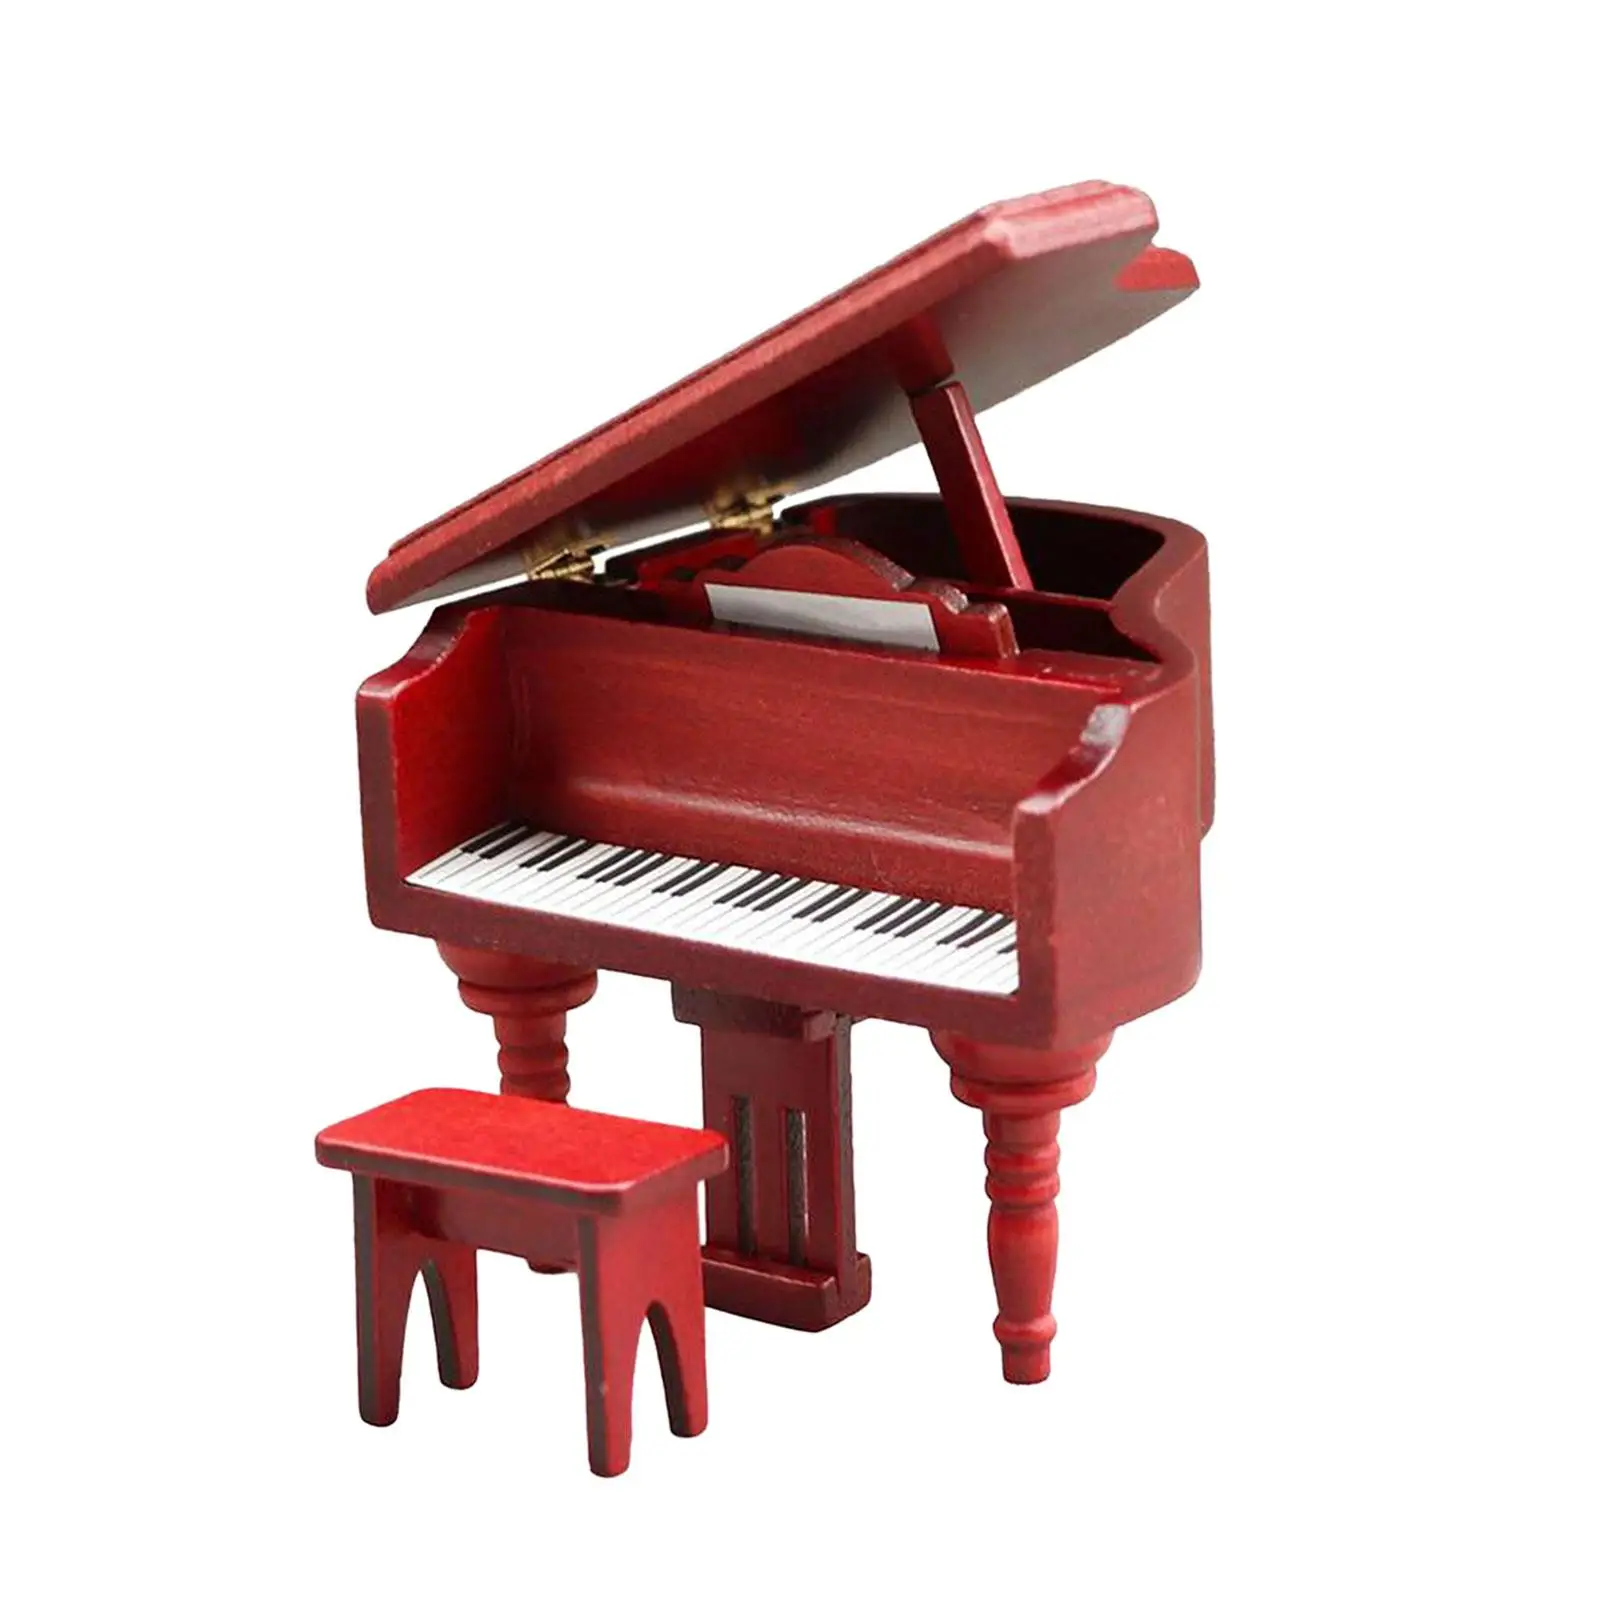 Piano with Chair Red Elegant for 1:12 Dollhouse DIY Projects Pretend Game Child